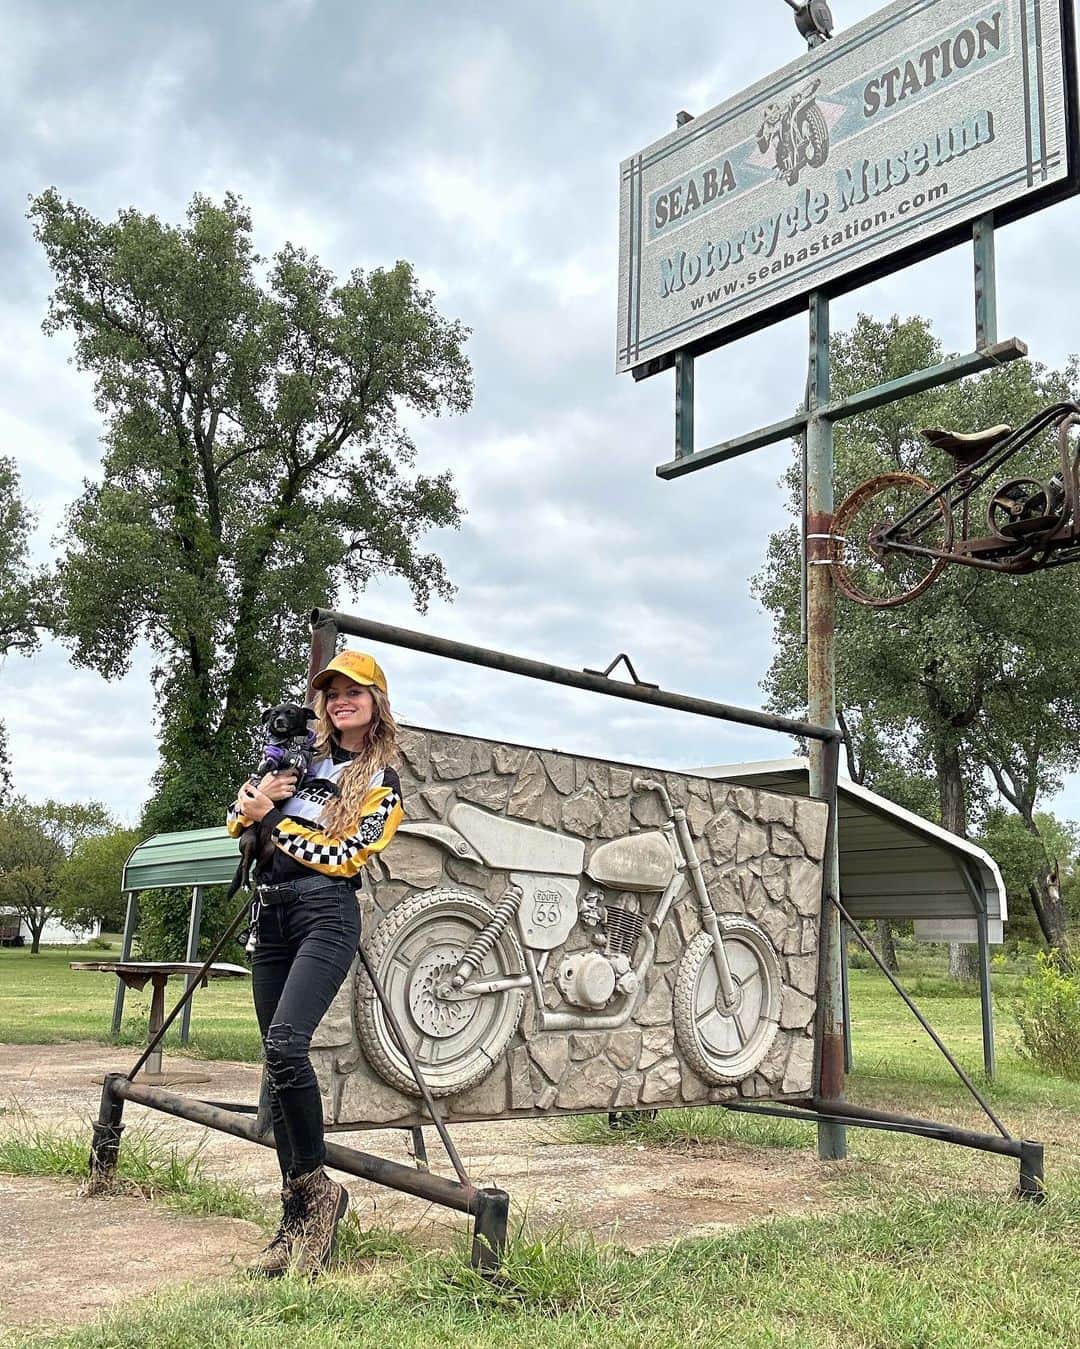 コーディー・レニー・キャメロンさんのインスタグラム写真 - (コーディー・レニー・キャメロンInstagram)「⚡️Day 6 Riding Route 66 for charity  💥Shamrock, TX to Tulsa, OK  💥Today: 293 miles, Total: 1506 miles We almost lost Mr. Frog today (swipe to last video)! But he hung on for dear life! Today was special, but I guess every day is! We left Shamrock early and cruised to the Route 66 Museum in Clinton, OK where we ran into an @eaglerider tour group doing Route 66 the opposite way of us. Then we stopped by the Seaba Station Motorcycle Museum which we almost skipped to save time, but I’m so glad we didn’t! So many cool vintage bikes!  We all bought tickets to win a Triumph in a drawing happening New Years Day so fingers crossed for us! After we checked in to the Desert Hills Motel, we met up with the president of the OK Route 66 Association, Rhys, who heard about our charity ride on Route 66 news. He told us loads of cool info about the history of the highway as we ate and drank at the Mother Road Cafe in Tulsa while listening to live music. The support of local mom and pops shops and comradery of the people across Route 66 is so neat!   Today’s ride sponsored by @sharksquadmotorcycleattorneys 🦈  If you’d like to donate to Chopper’s Charity go to www.gofundme.com/f/chopperscharity ❤️ All proceeds go to @wagmorpets dog rescue!   #ShiftGearsChangeLives #Route66 #route66roadtrip #historicroute66 #roadtrip #crosscountry #bikerbabe #sportster」9月14日 5時28分 - heyitscodee